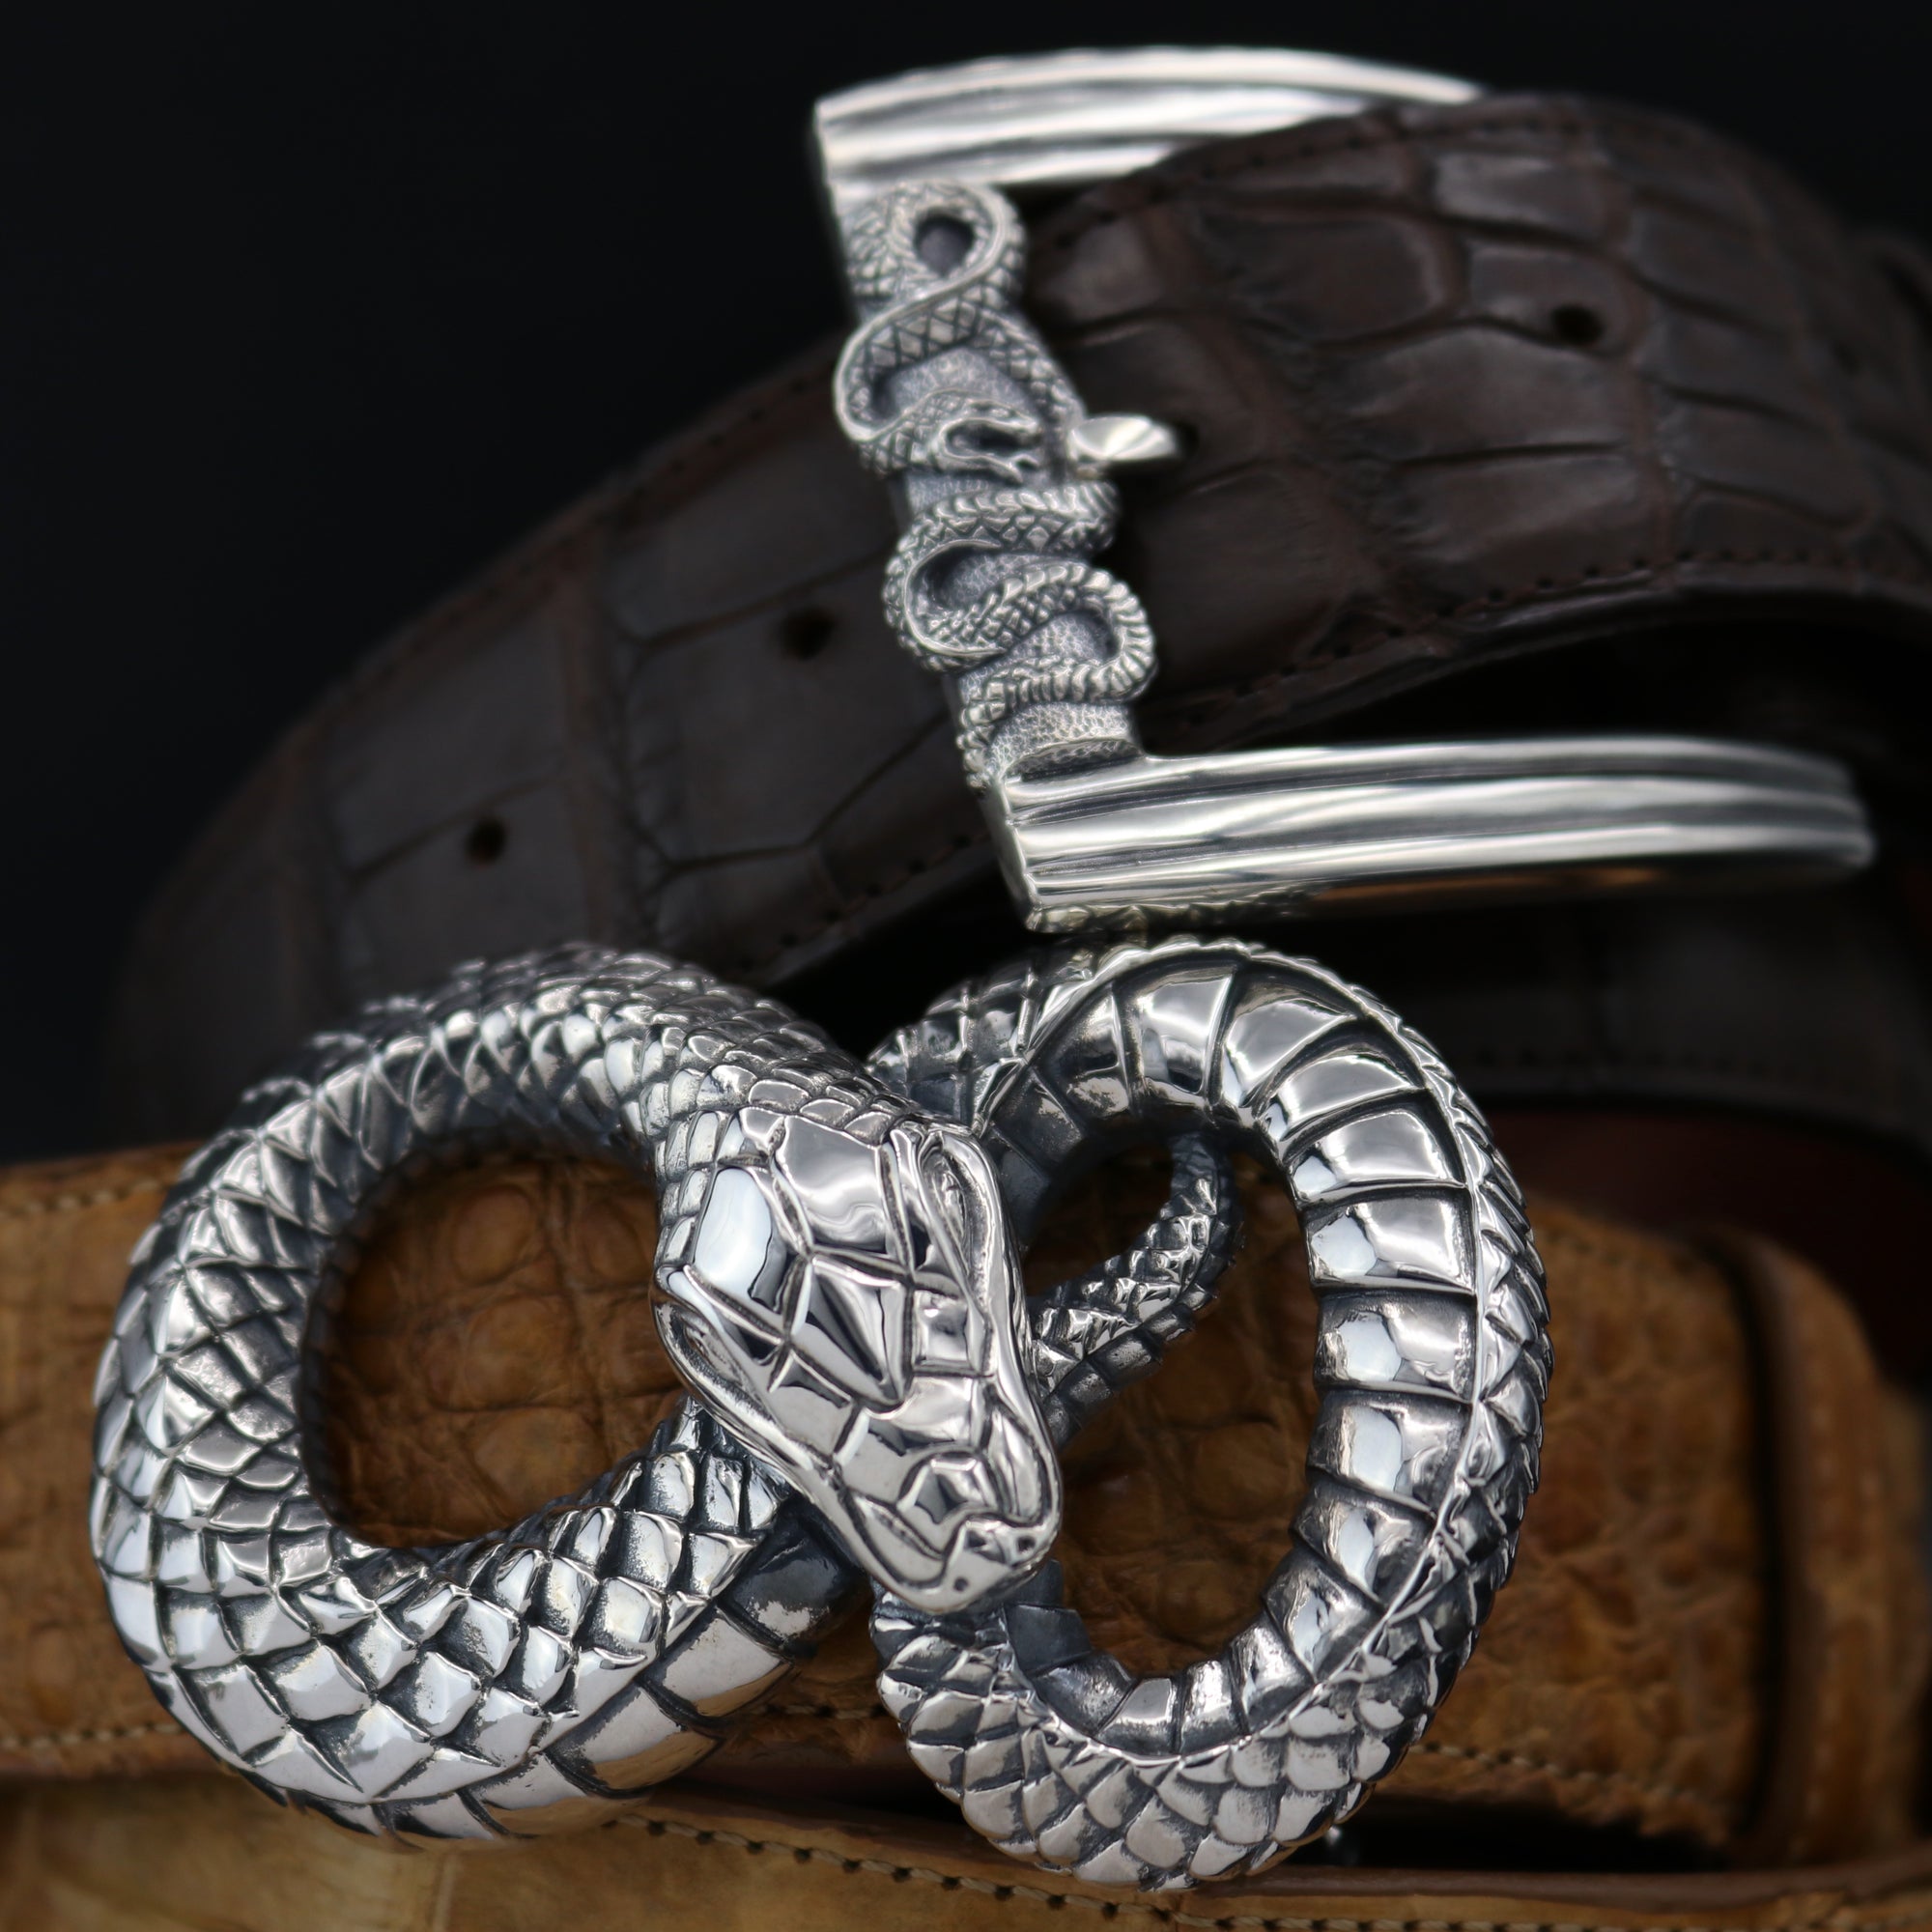 Two Sterlin Silver Snake buckles, for men or women. The top buckle has a Snake wrapping the front of the rectangular harness buckle. The bottom buckle is of a  Figure 8 shape. These both fit 1.5" belts.